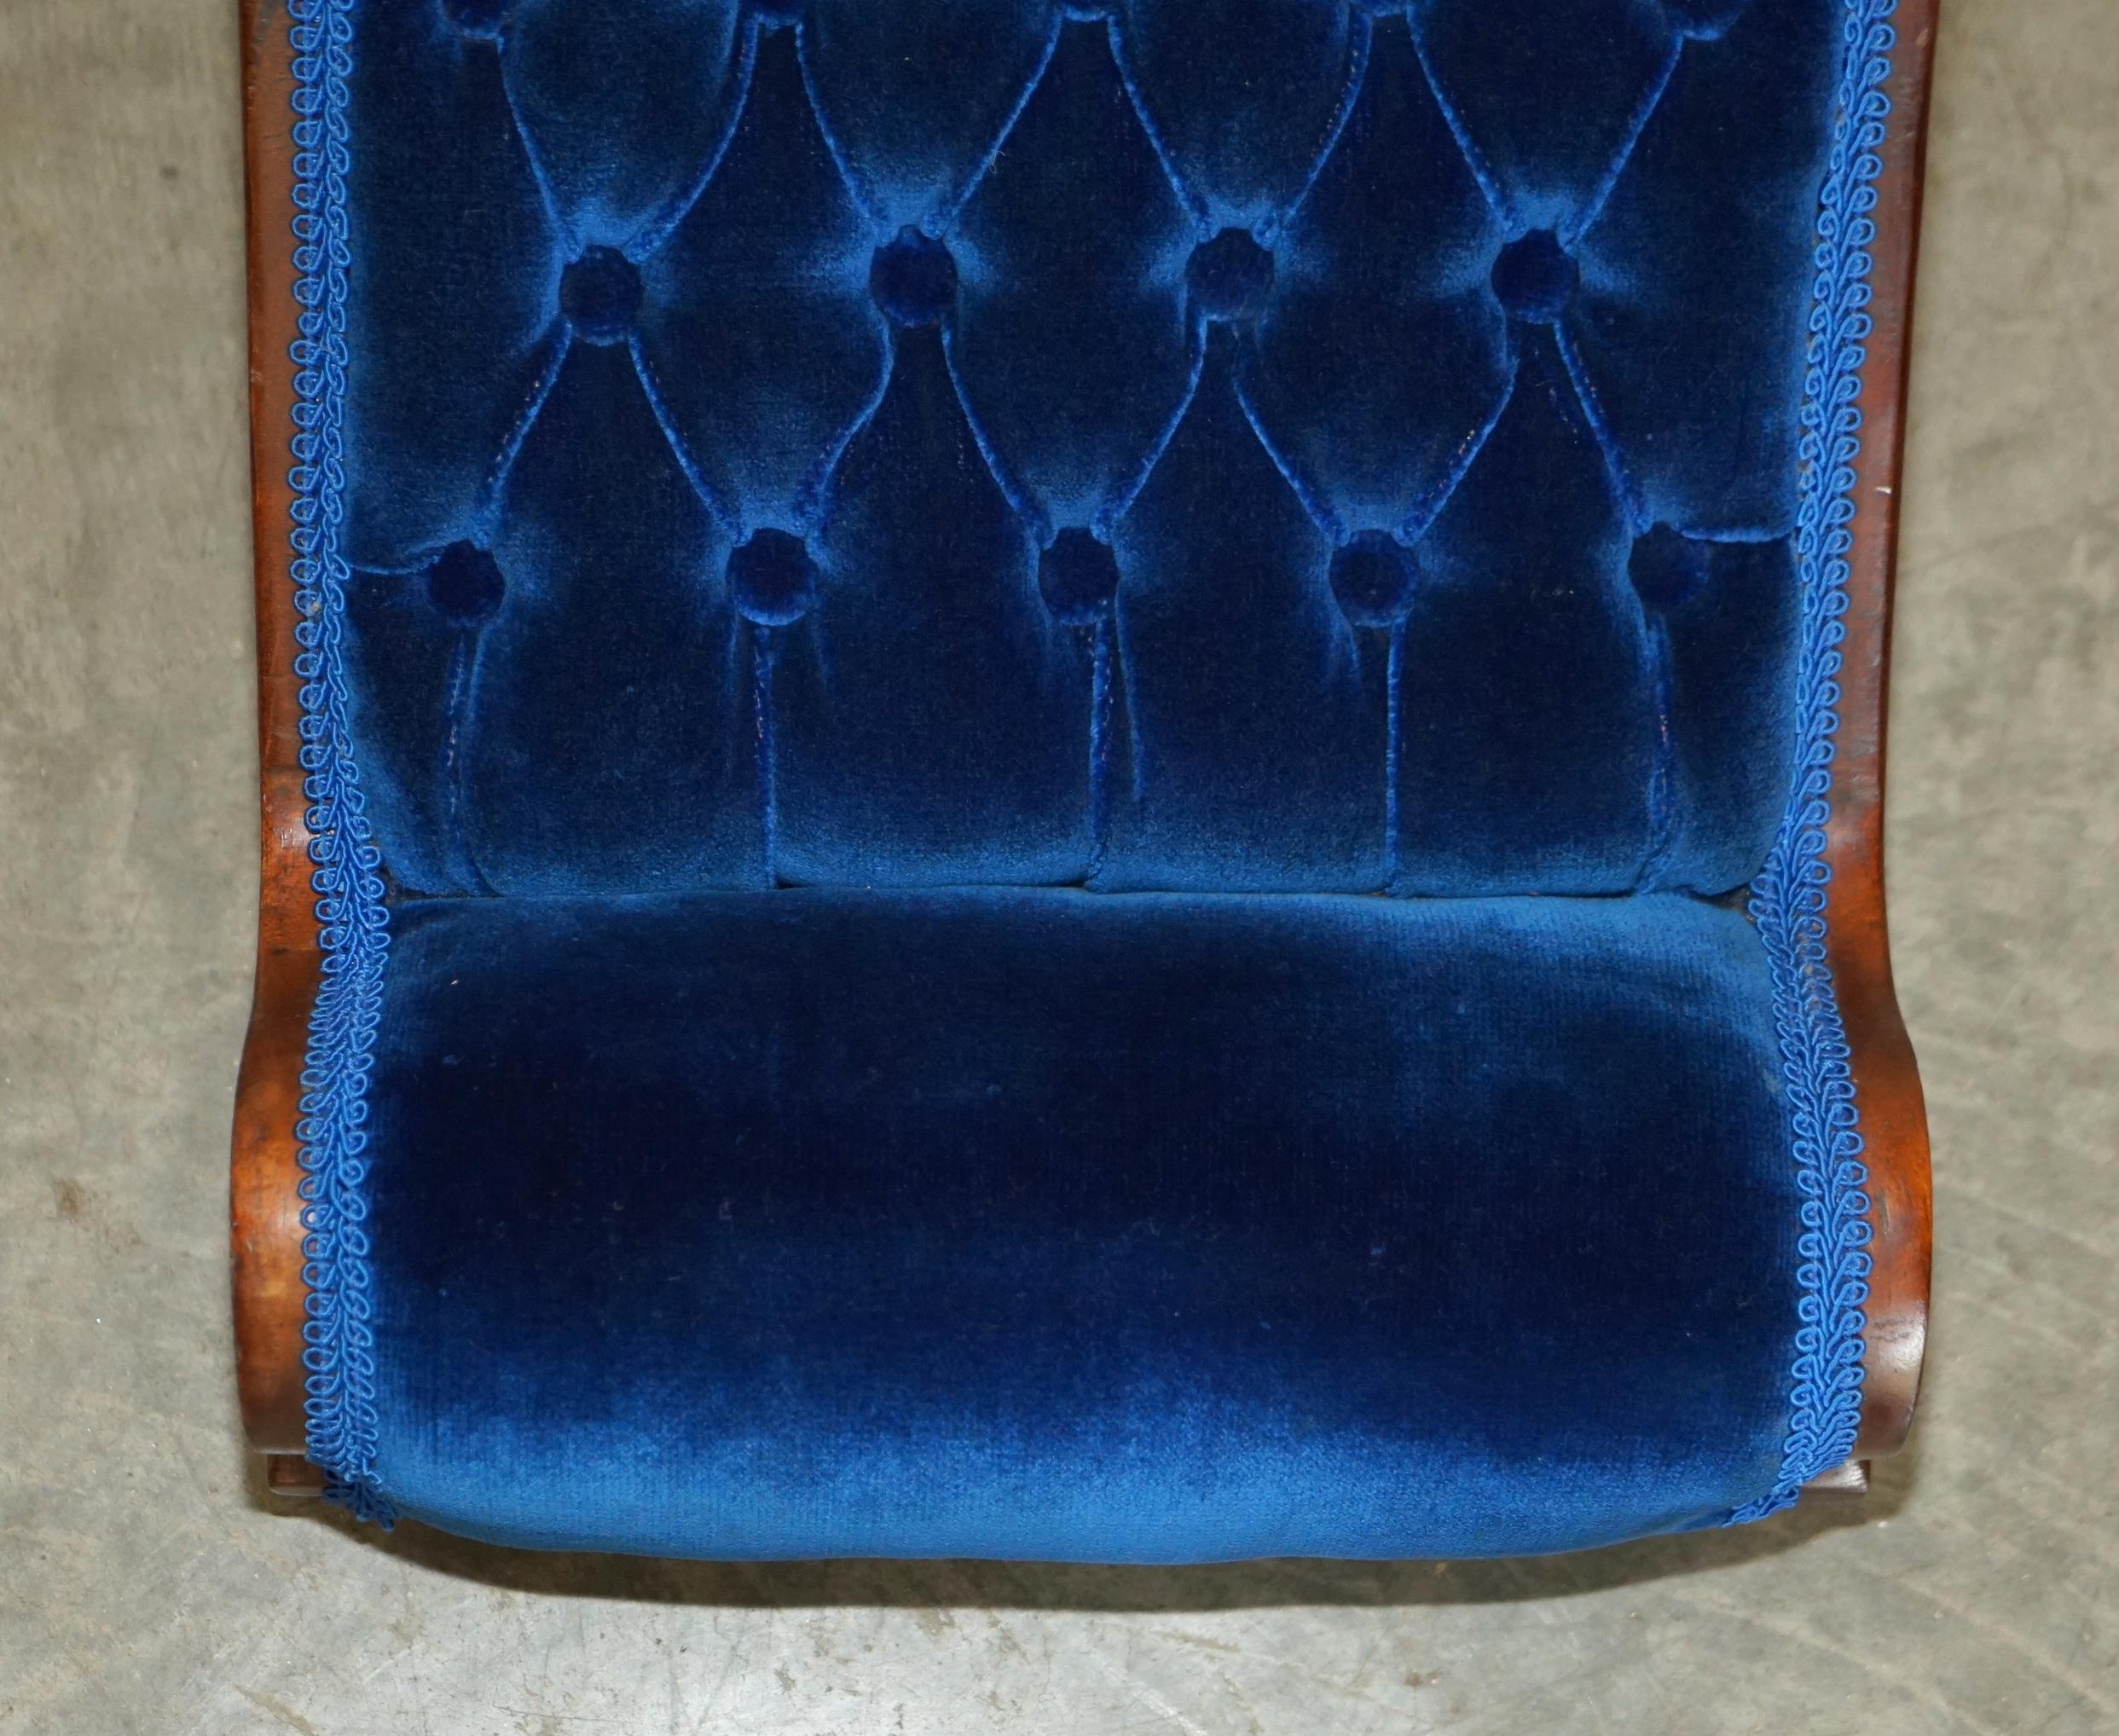 19th Century PAIR OF REGENCY BLUE ANTIQUE ViCTORIAN CHESTERFIELD TUFTED CURVED FOOTSTOOLS